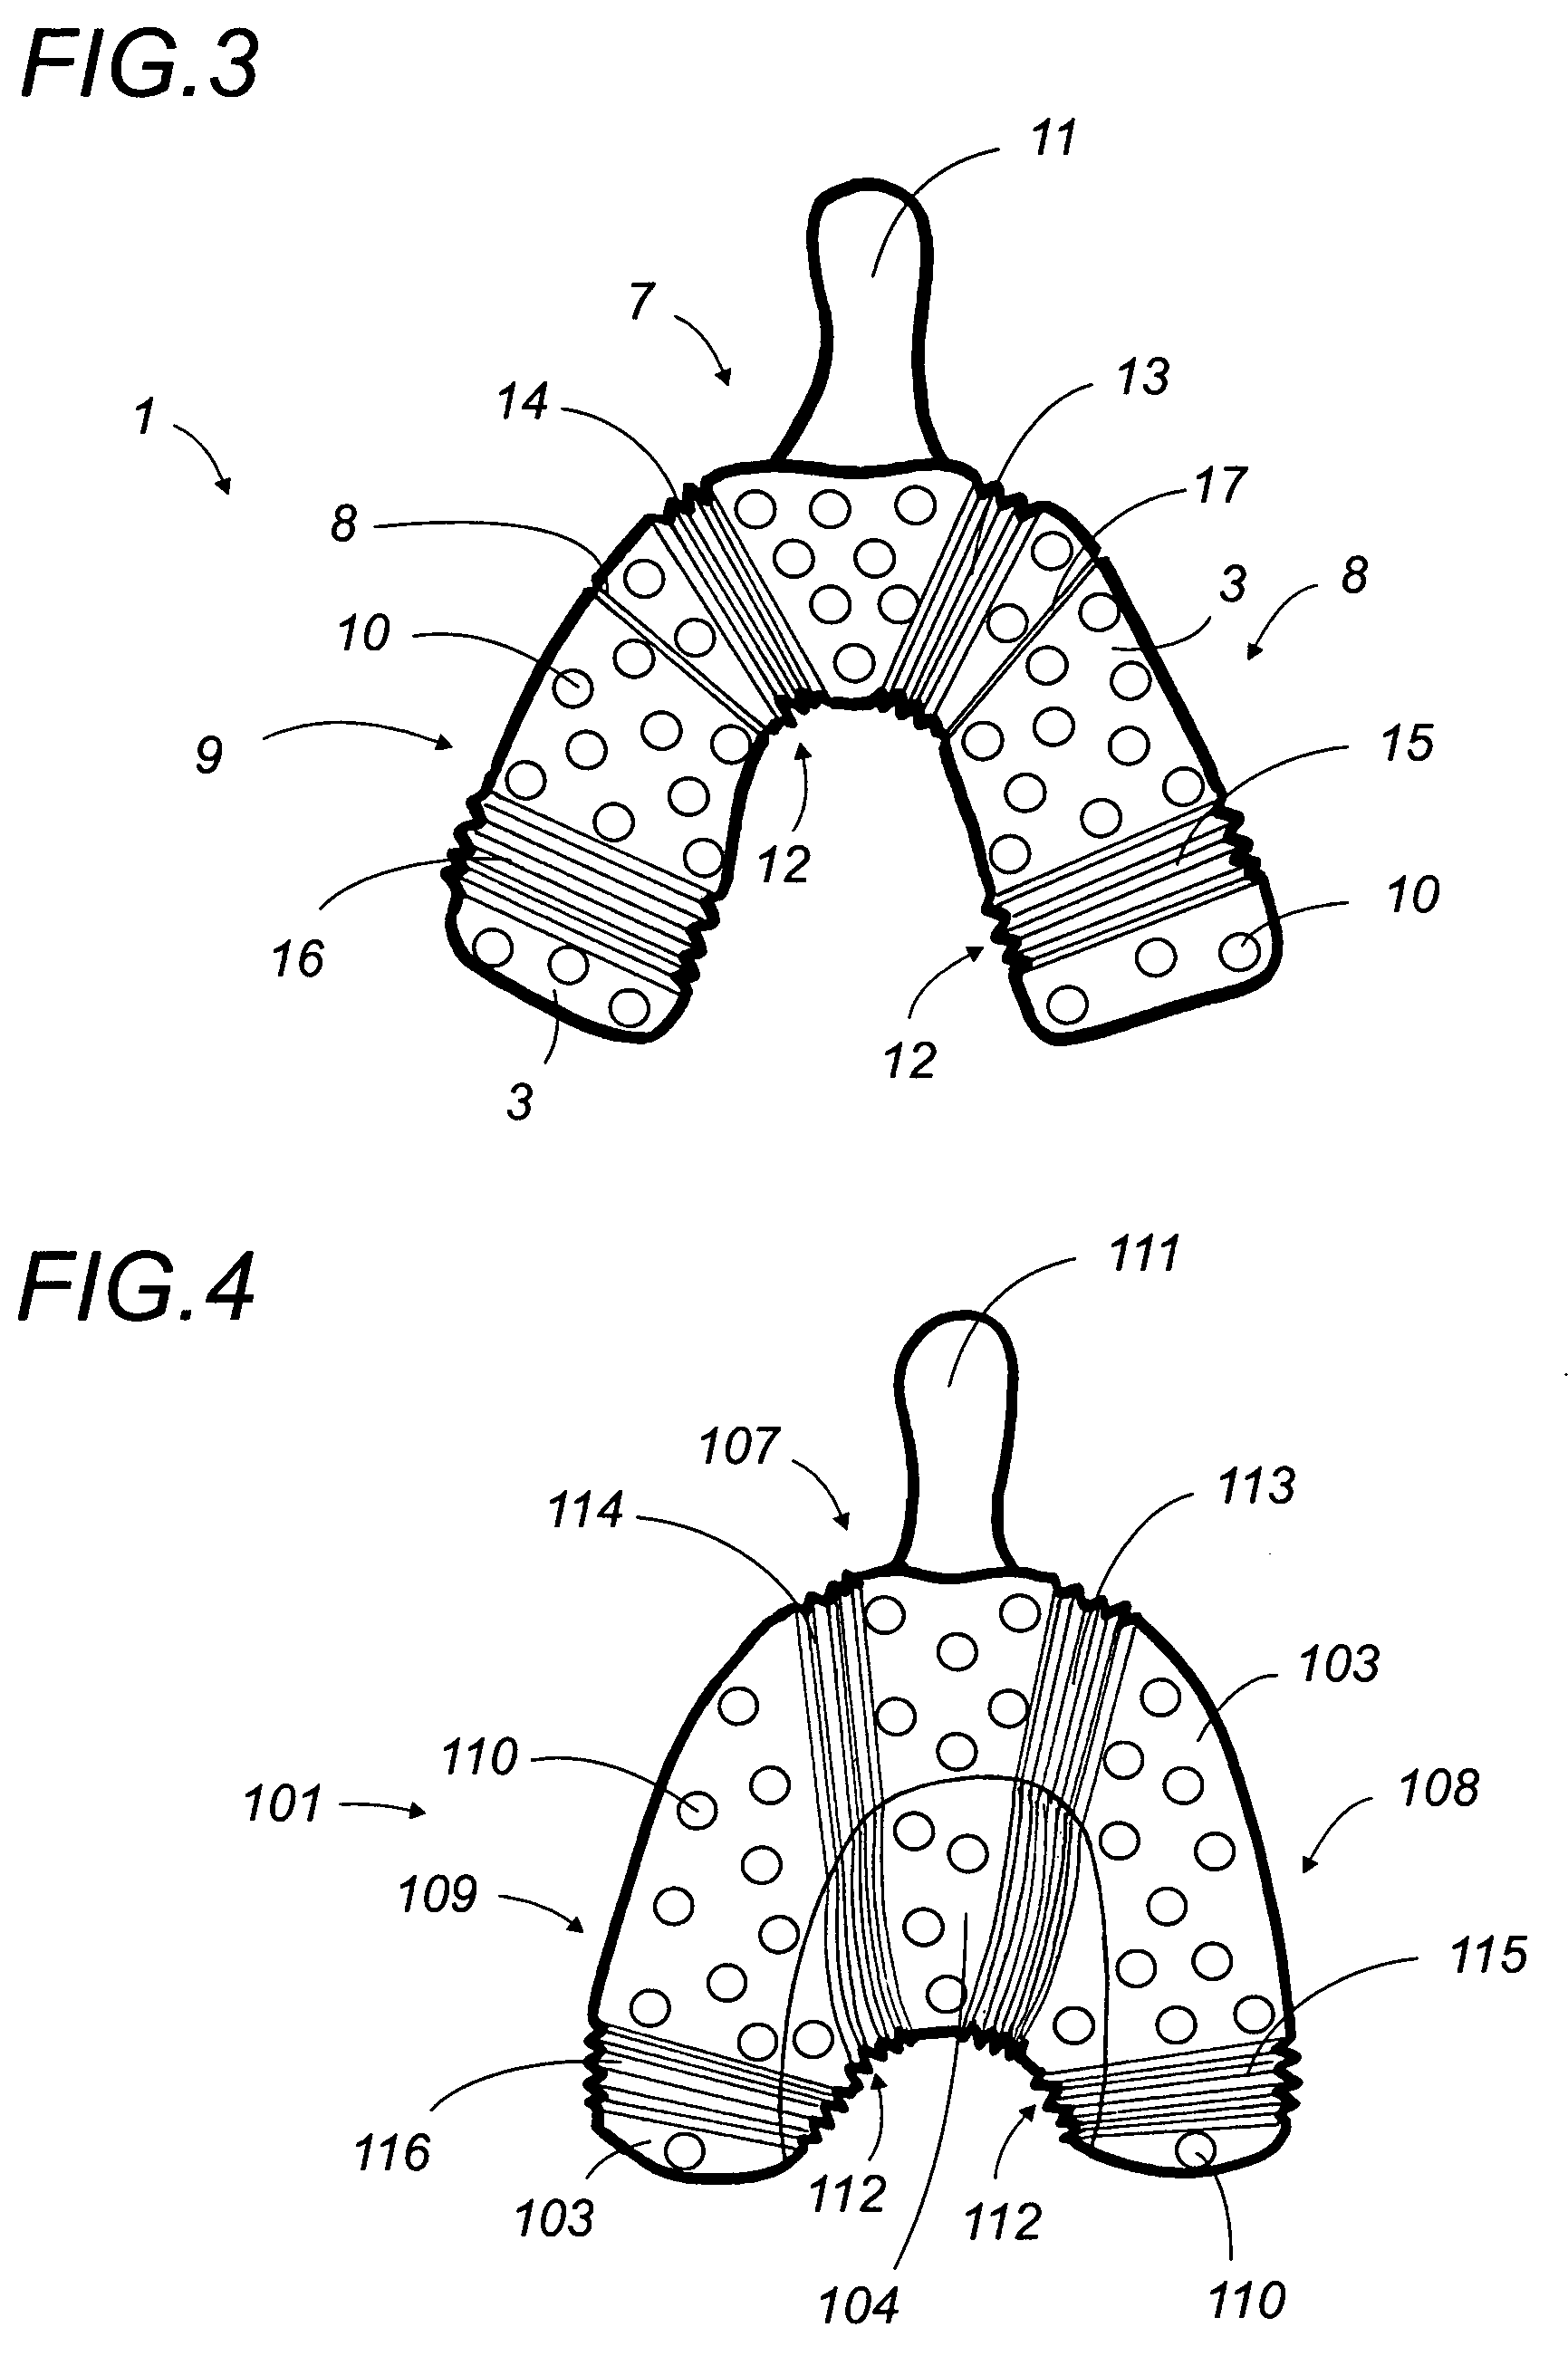 Adjustable impression tray with variable geometry